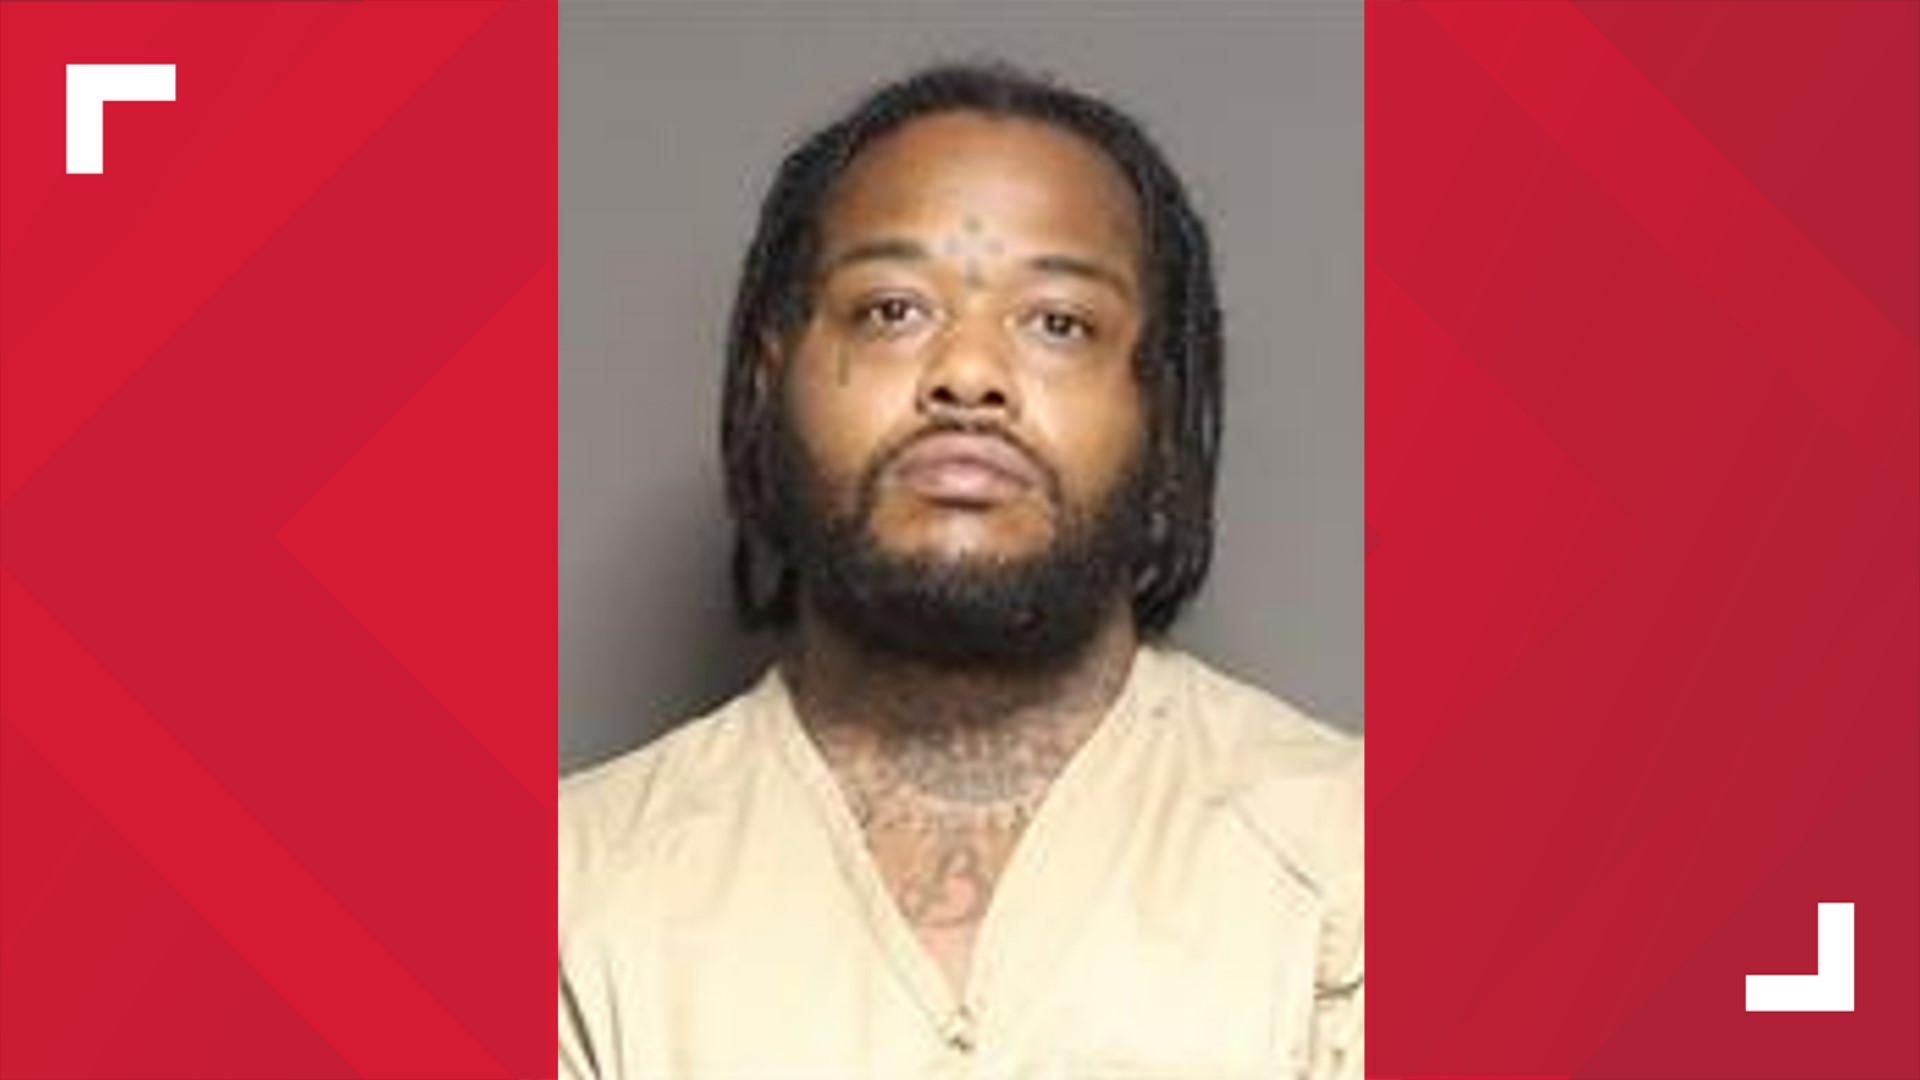 A Franklin County judge issued a $3 million bond for a man suspected of shooting and killing another man at a now-former after-hours club